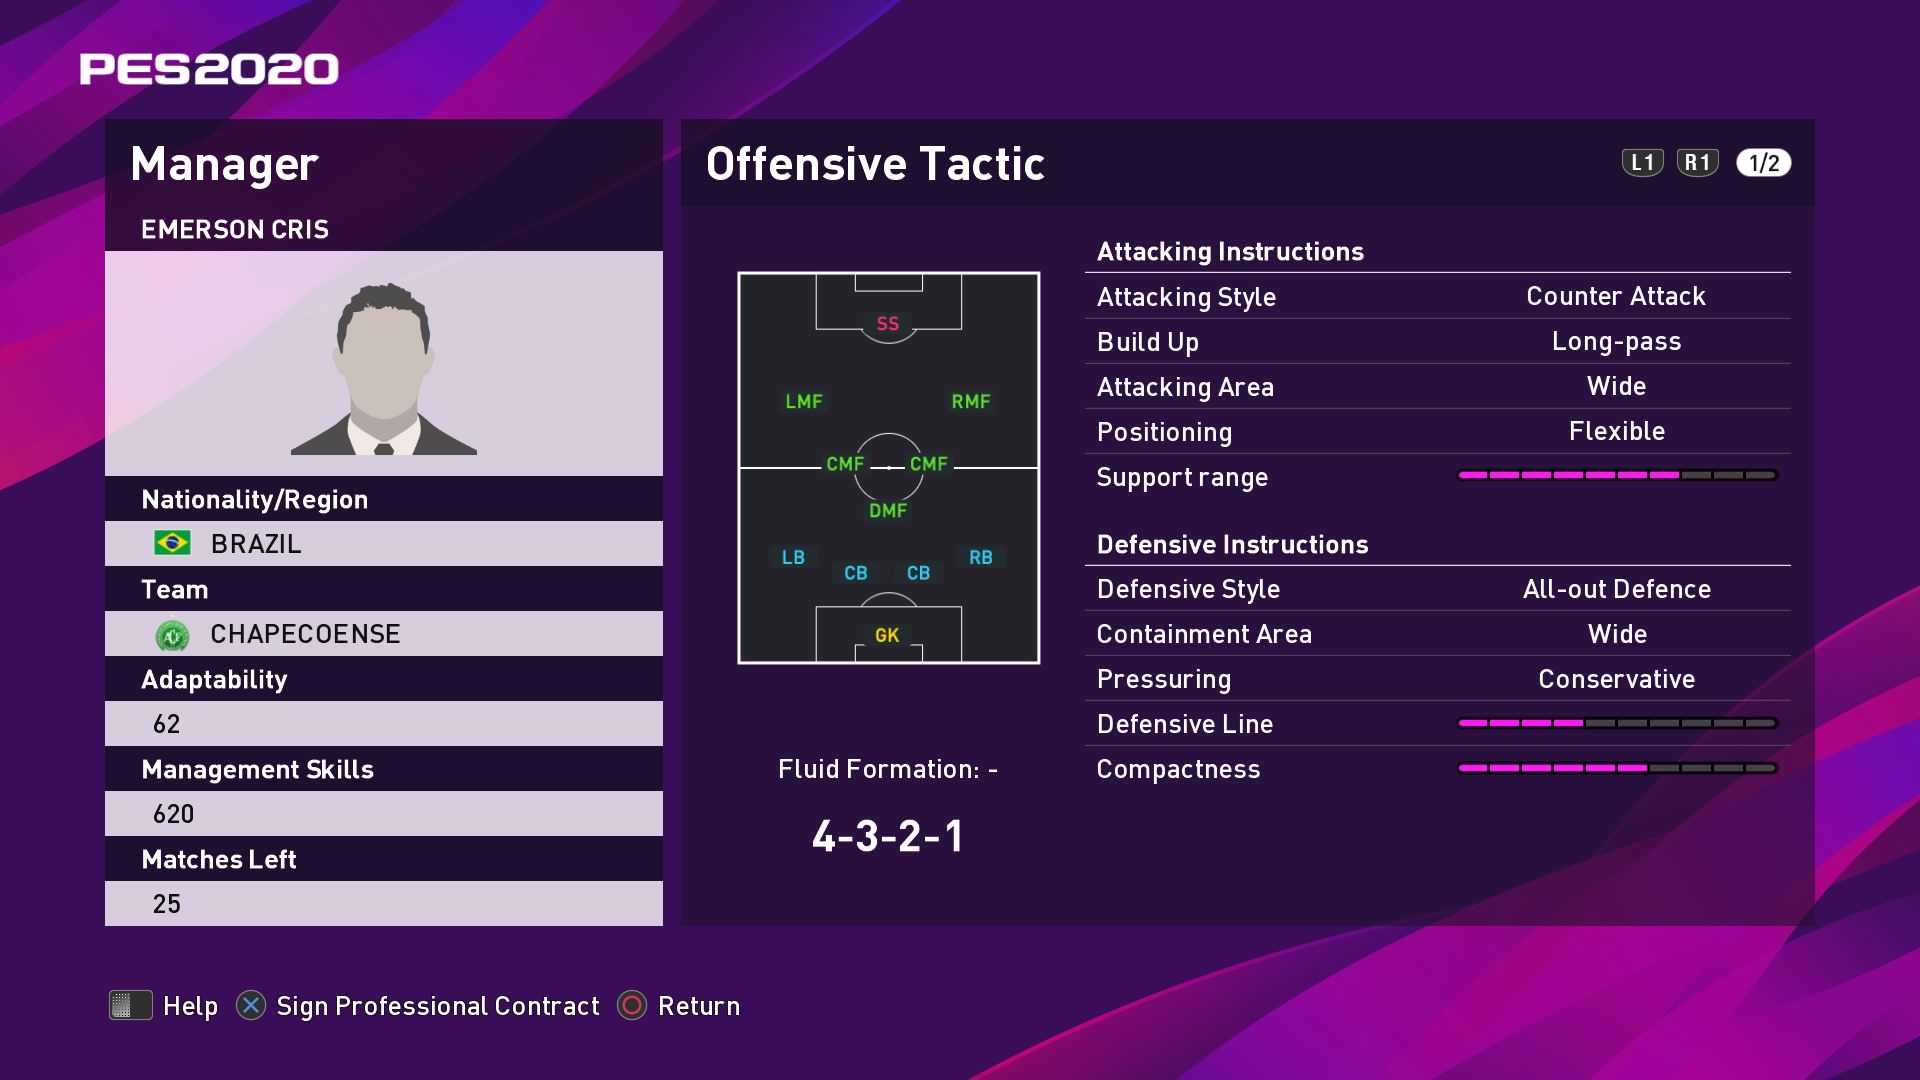 Emerson Cris Offensive Tactic in PES 2020 myClub